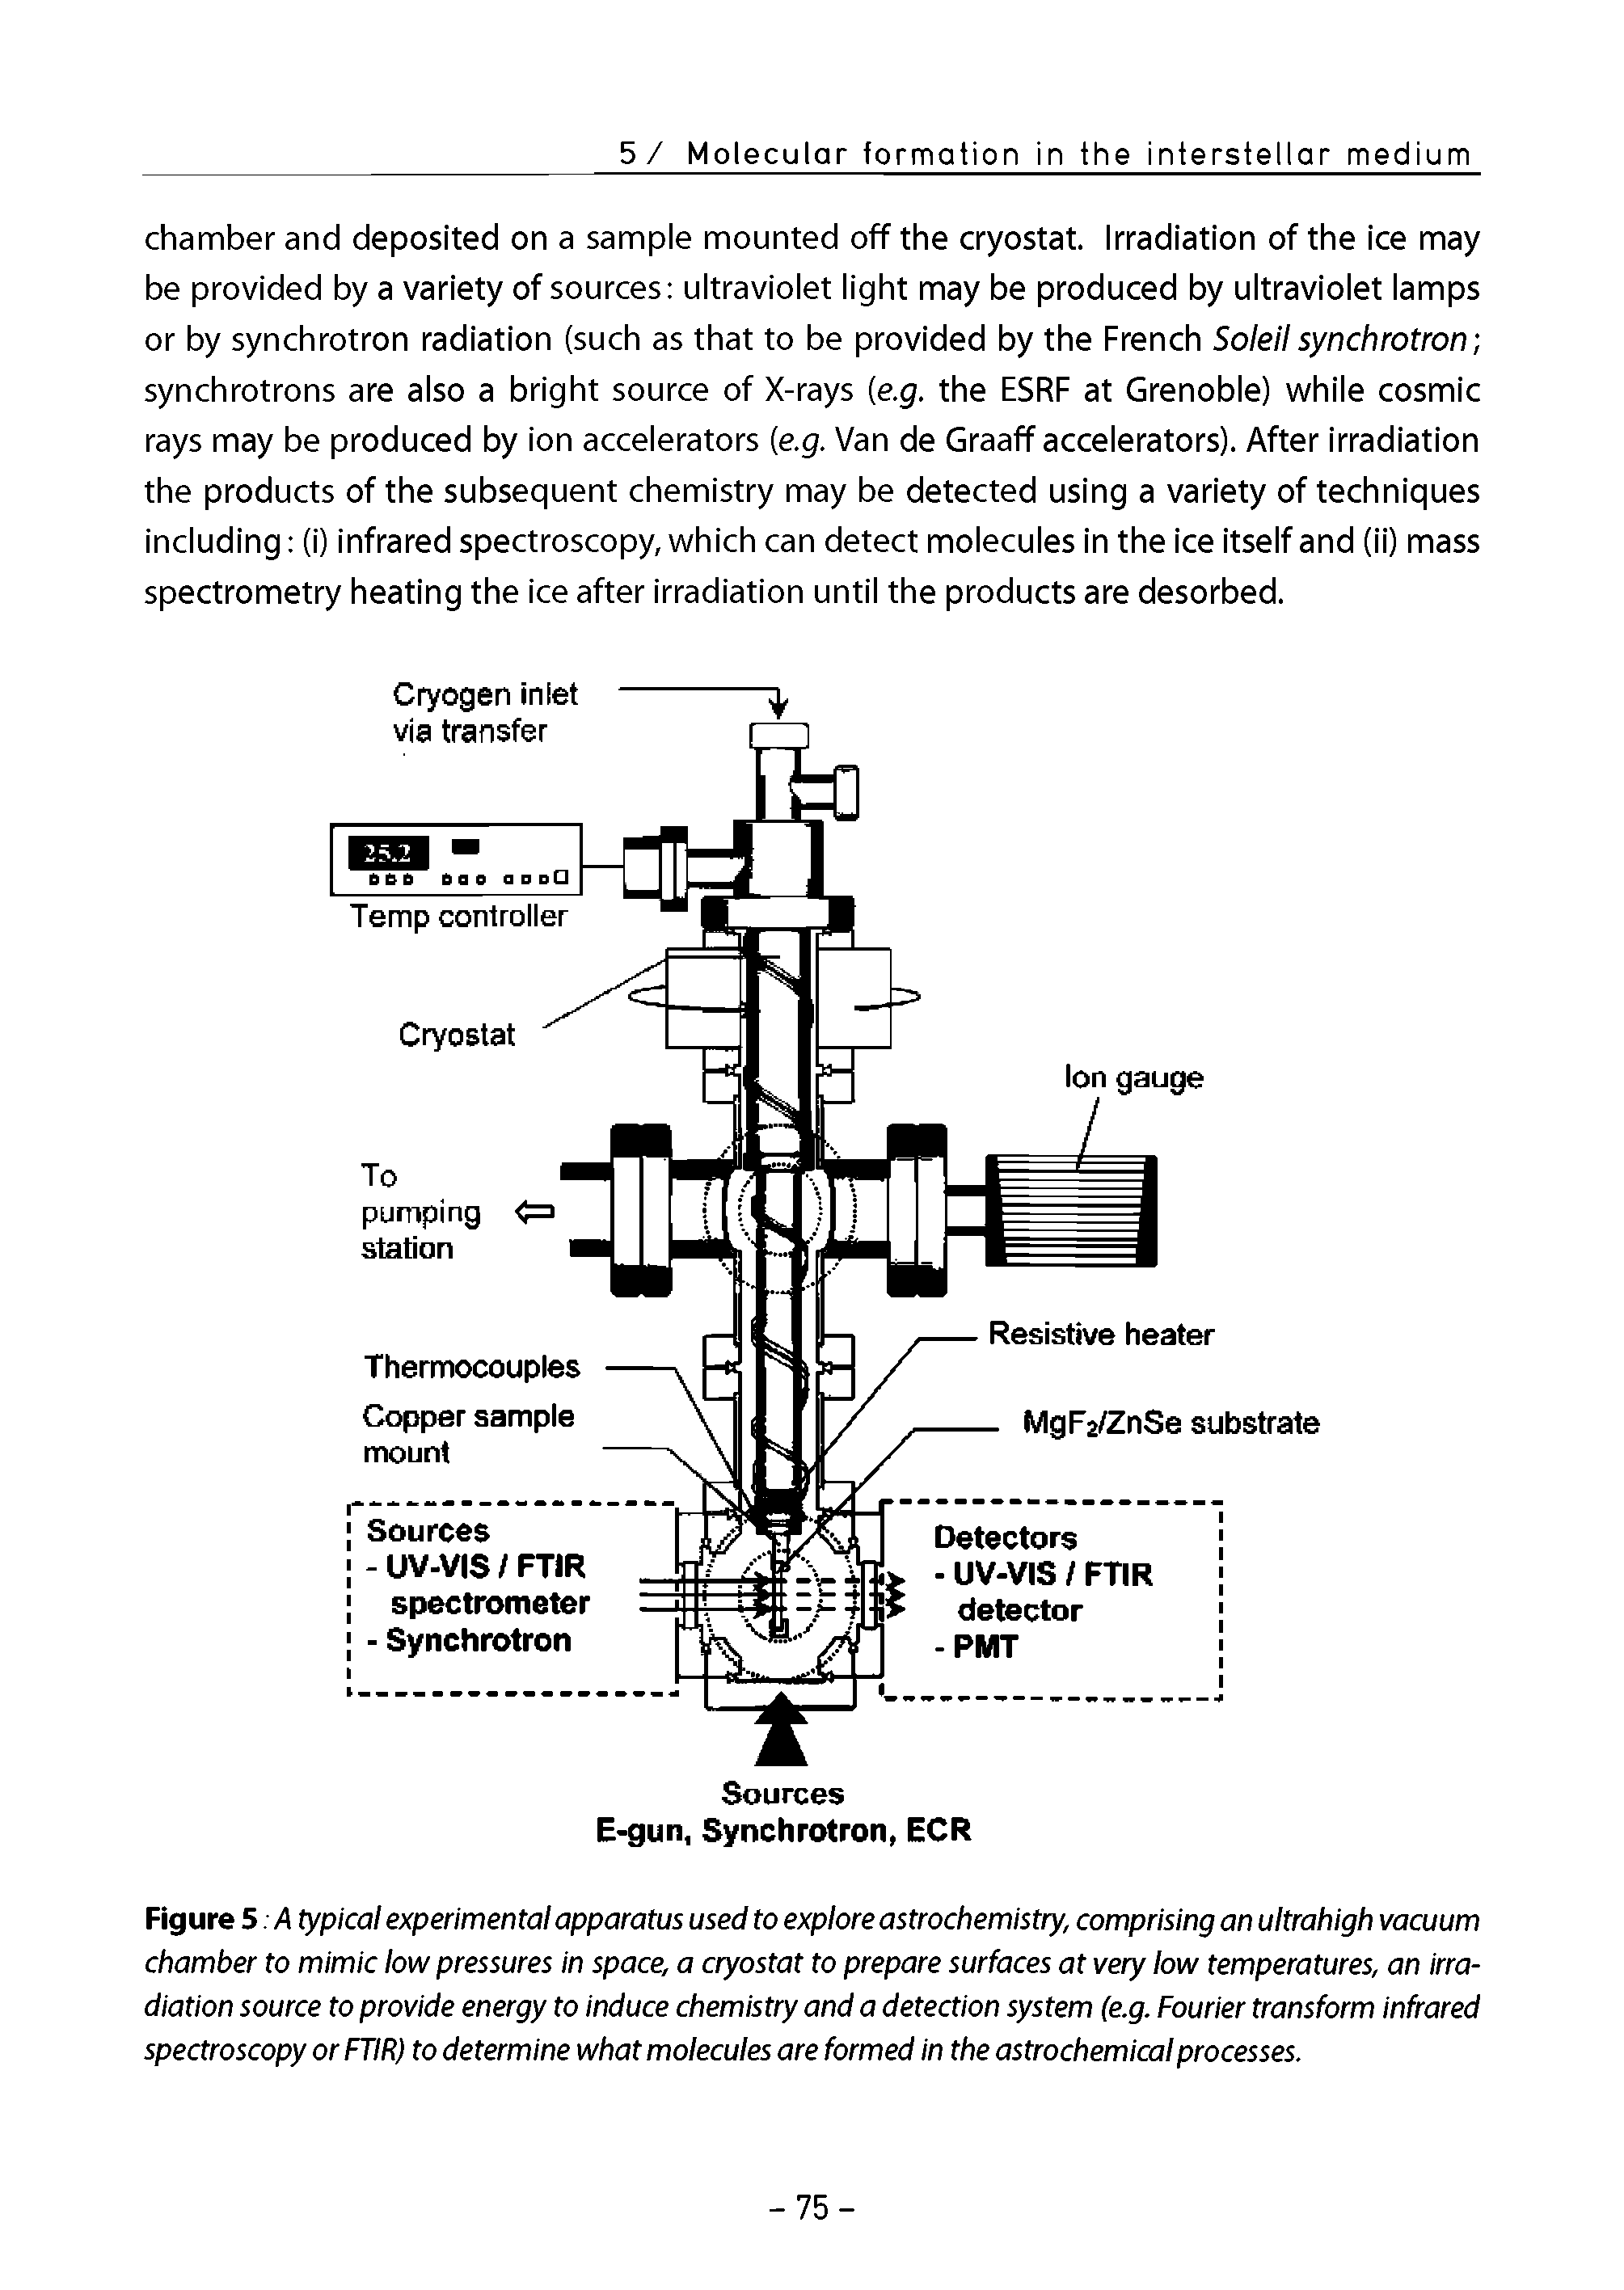 Figure 5. A typical experimental apparatus used to explore astrochemistry, comprising an ultrahigh vacuum chamber to mimic low pressures in space, a cryostat to prepare surfaces at very low temperatures, an irradiation source to provide energy to induce chemistry and a detection system (e.g. Fourier transform infrared spectroscopy or FTIR) to determine what molecules are formed in the astrochemicalprocesses.